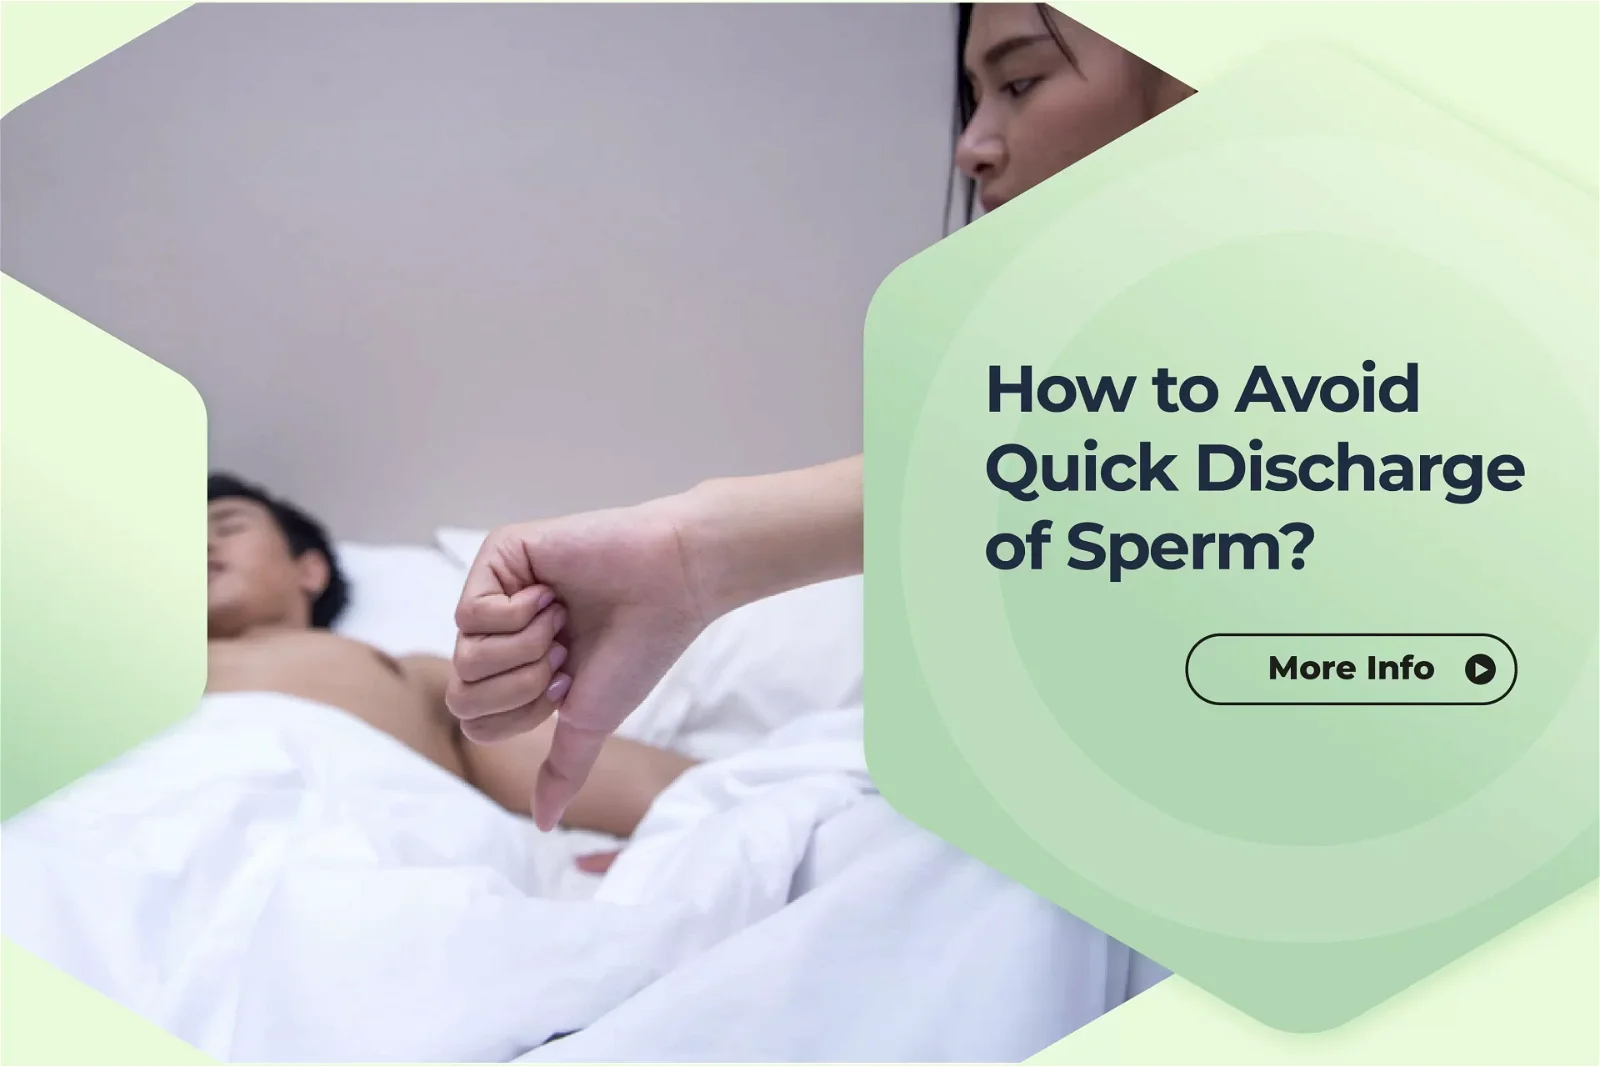 How to Avoid Quick Discharge of Sperm